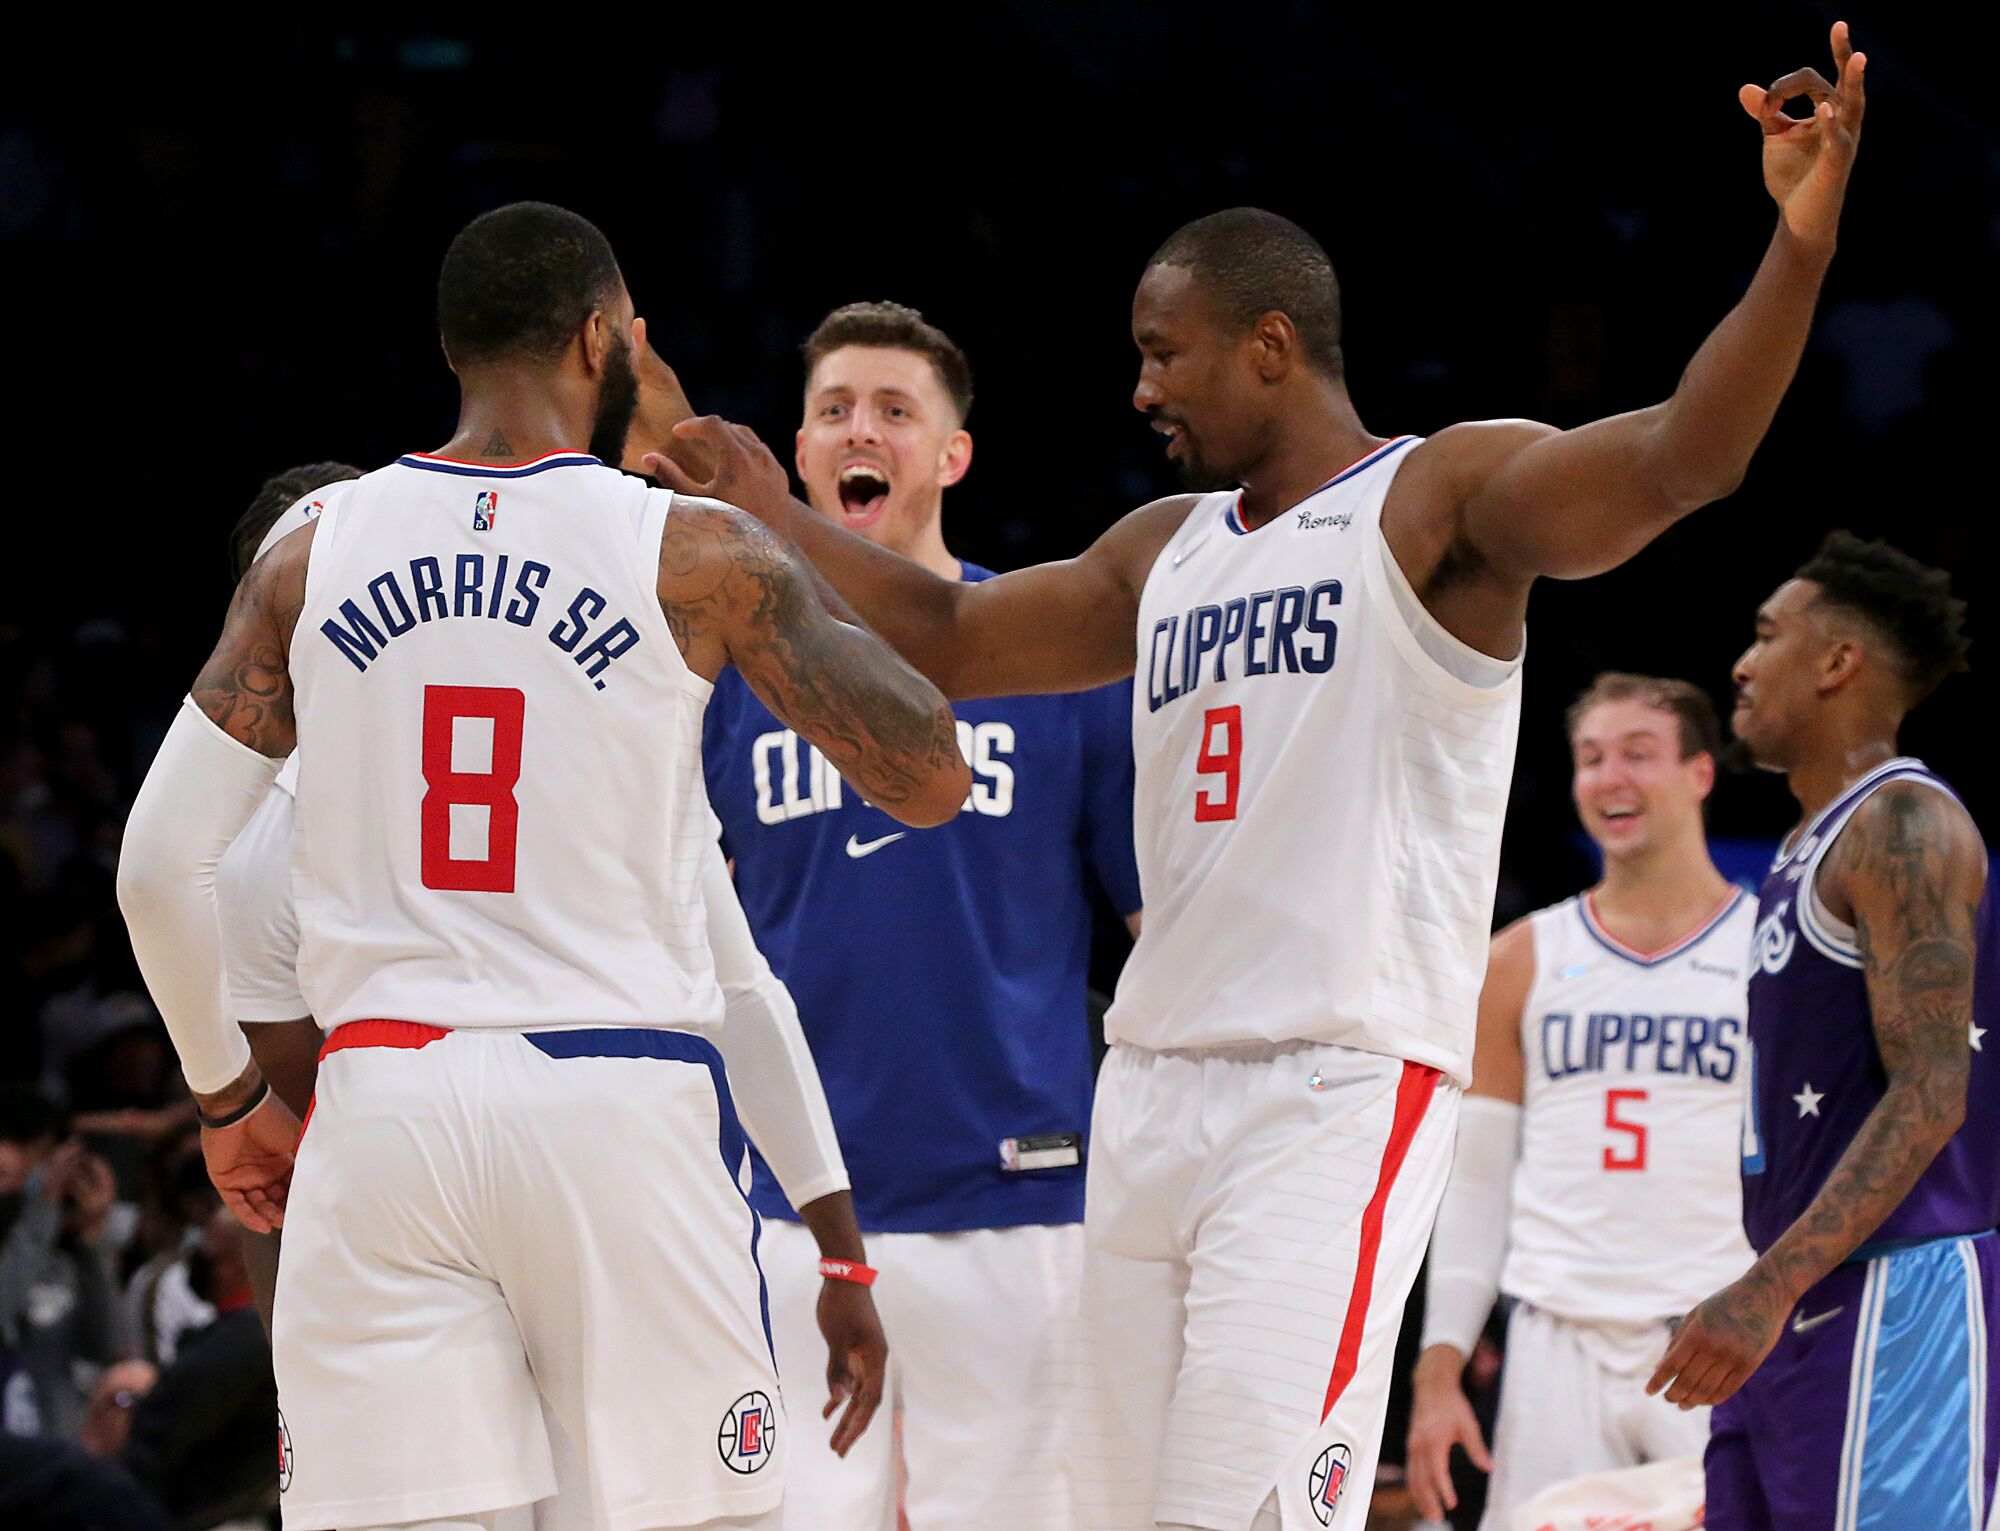 Clippers forward Marcus Morris Jr. is congratulated by teammates Isaiah Hartenstein, center, and Serge Ibaka.